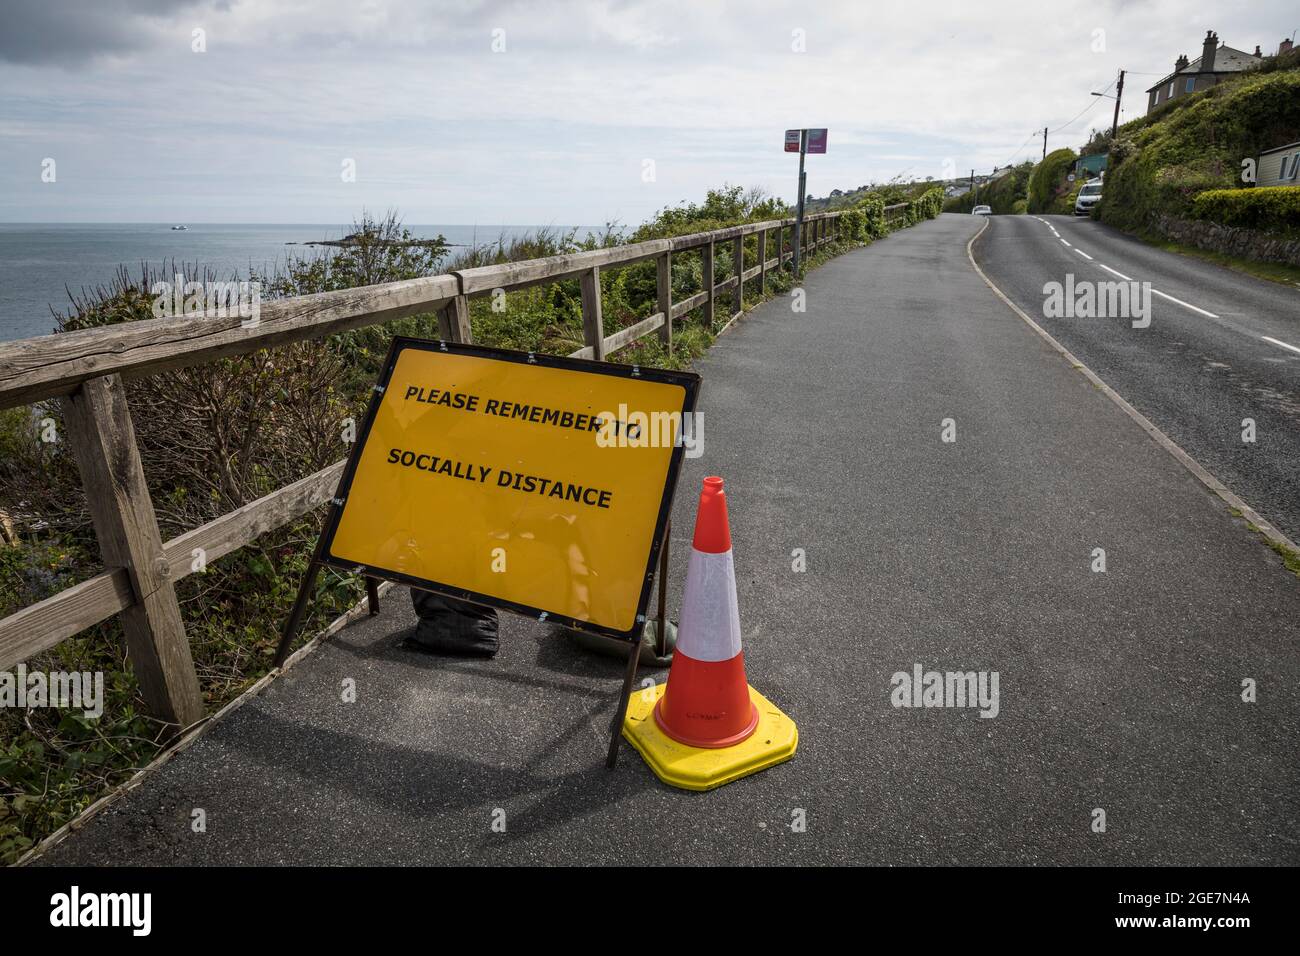 Roadside warning sign and cone reminding pedestrians to 'socially distance' during Covid-19 outbreak, Cornwall, England. Stock Photo